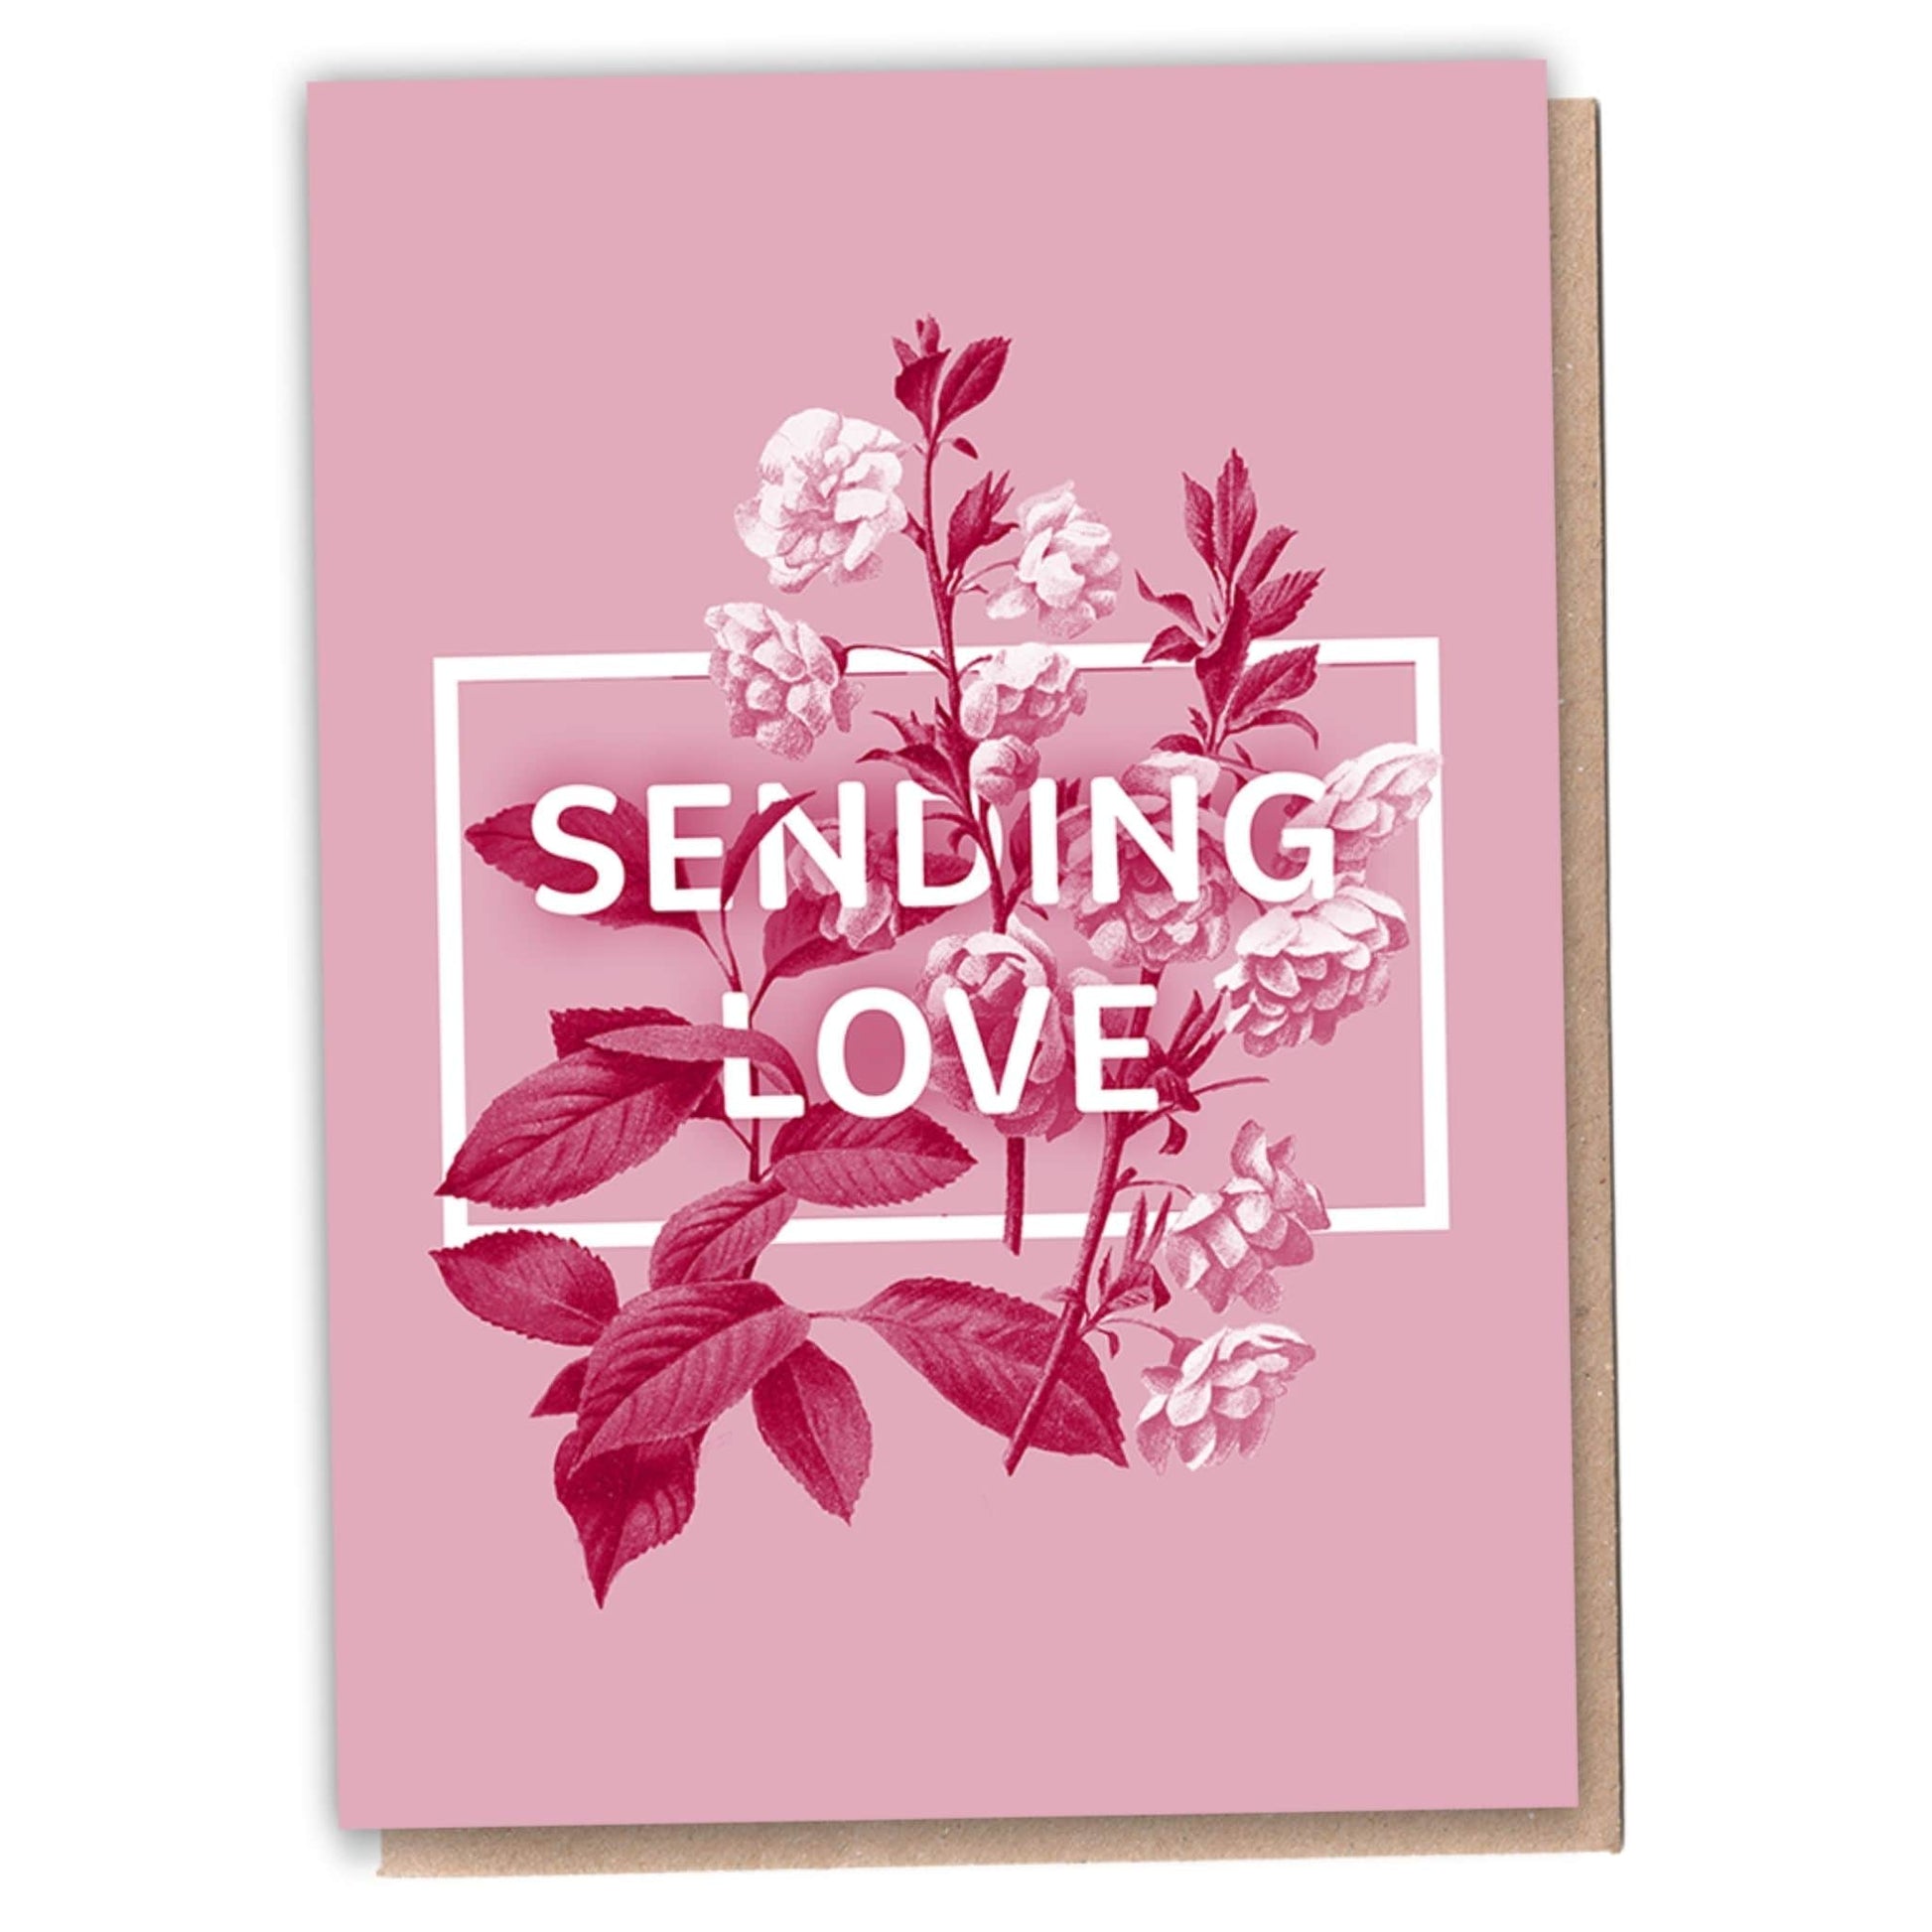 Sending Love - Blank Recycled Card + Tree from 1 Tree Cards